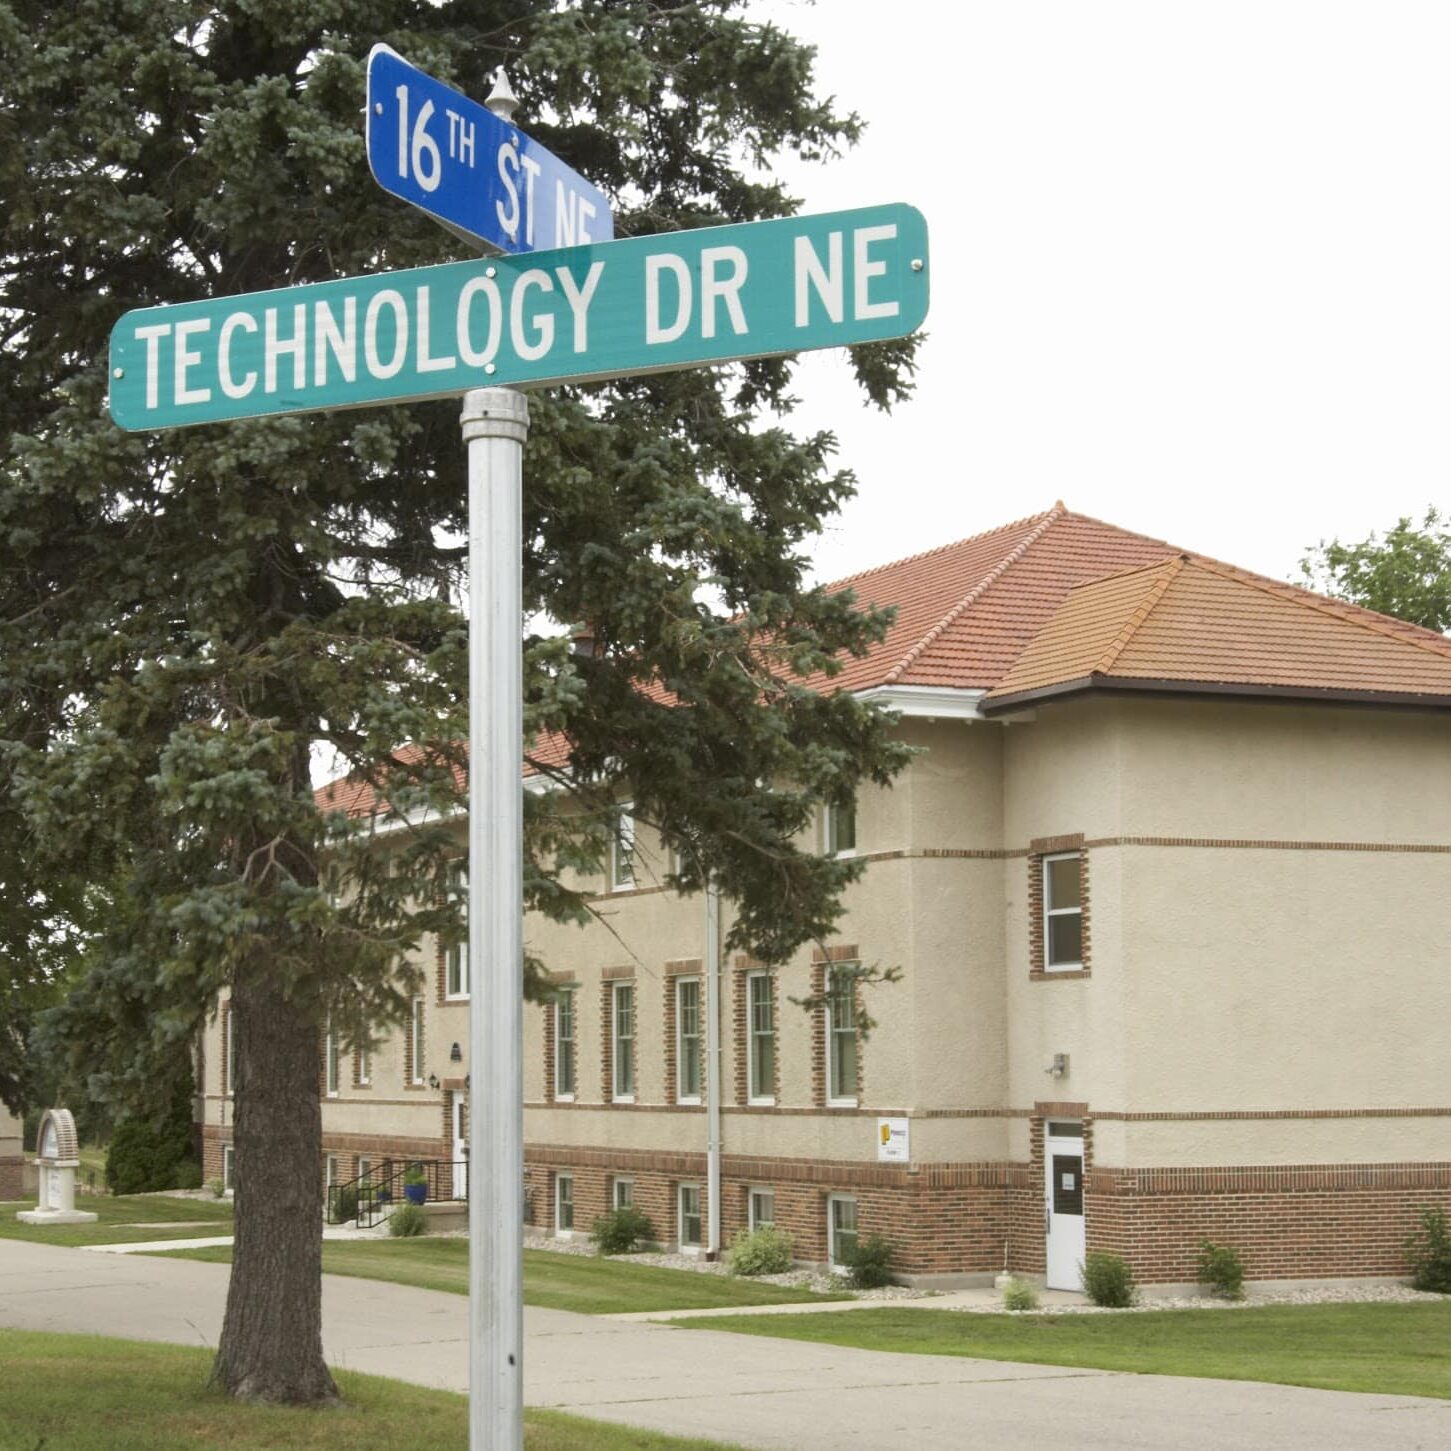 technology drive & 16th street sign